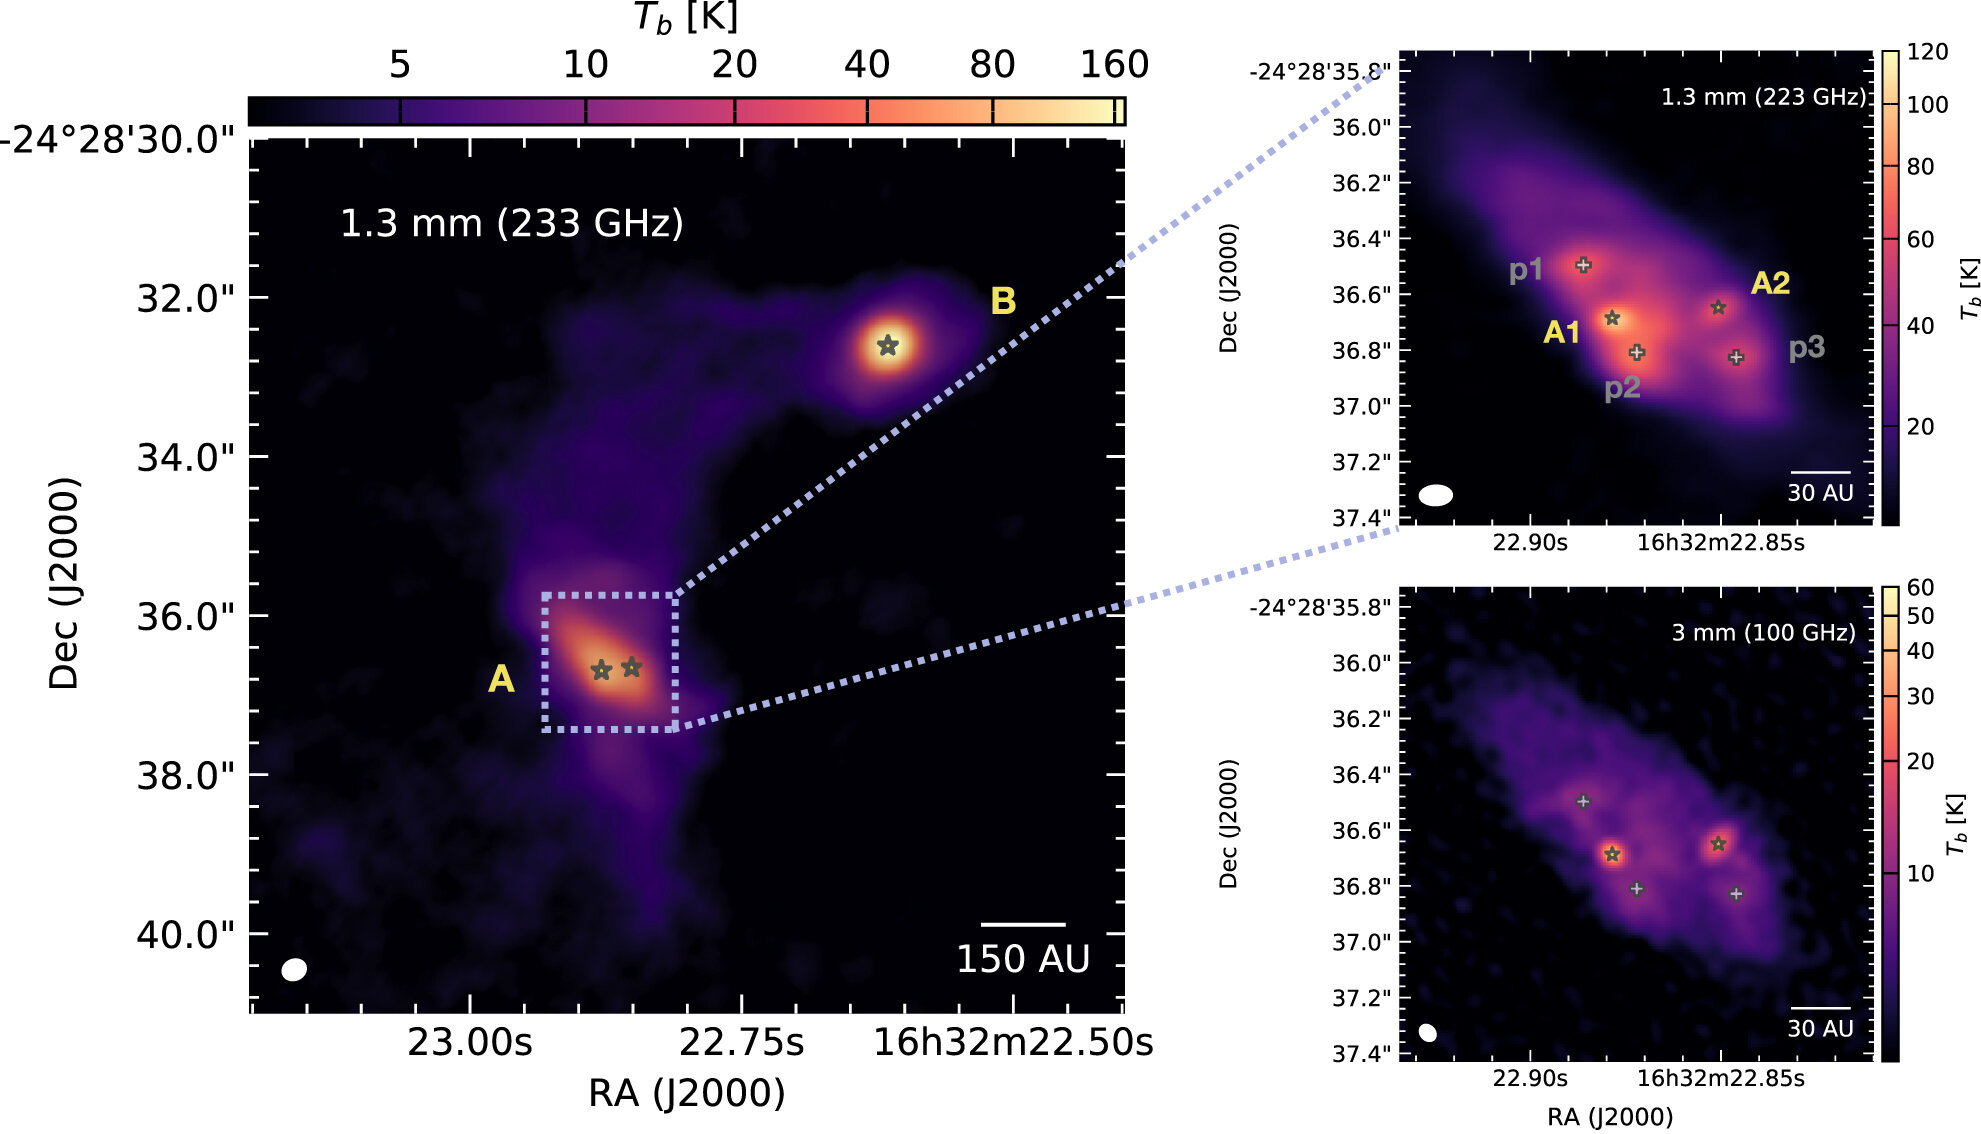 Action of two protostars appears to be making conditions right for planet formation